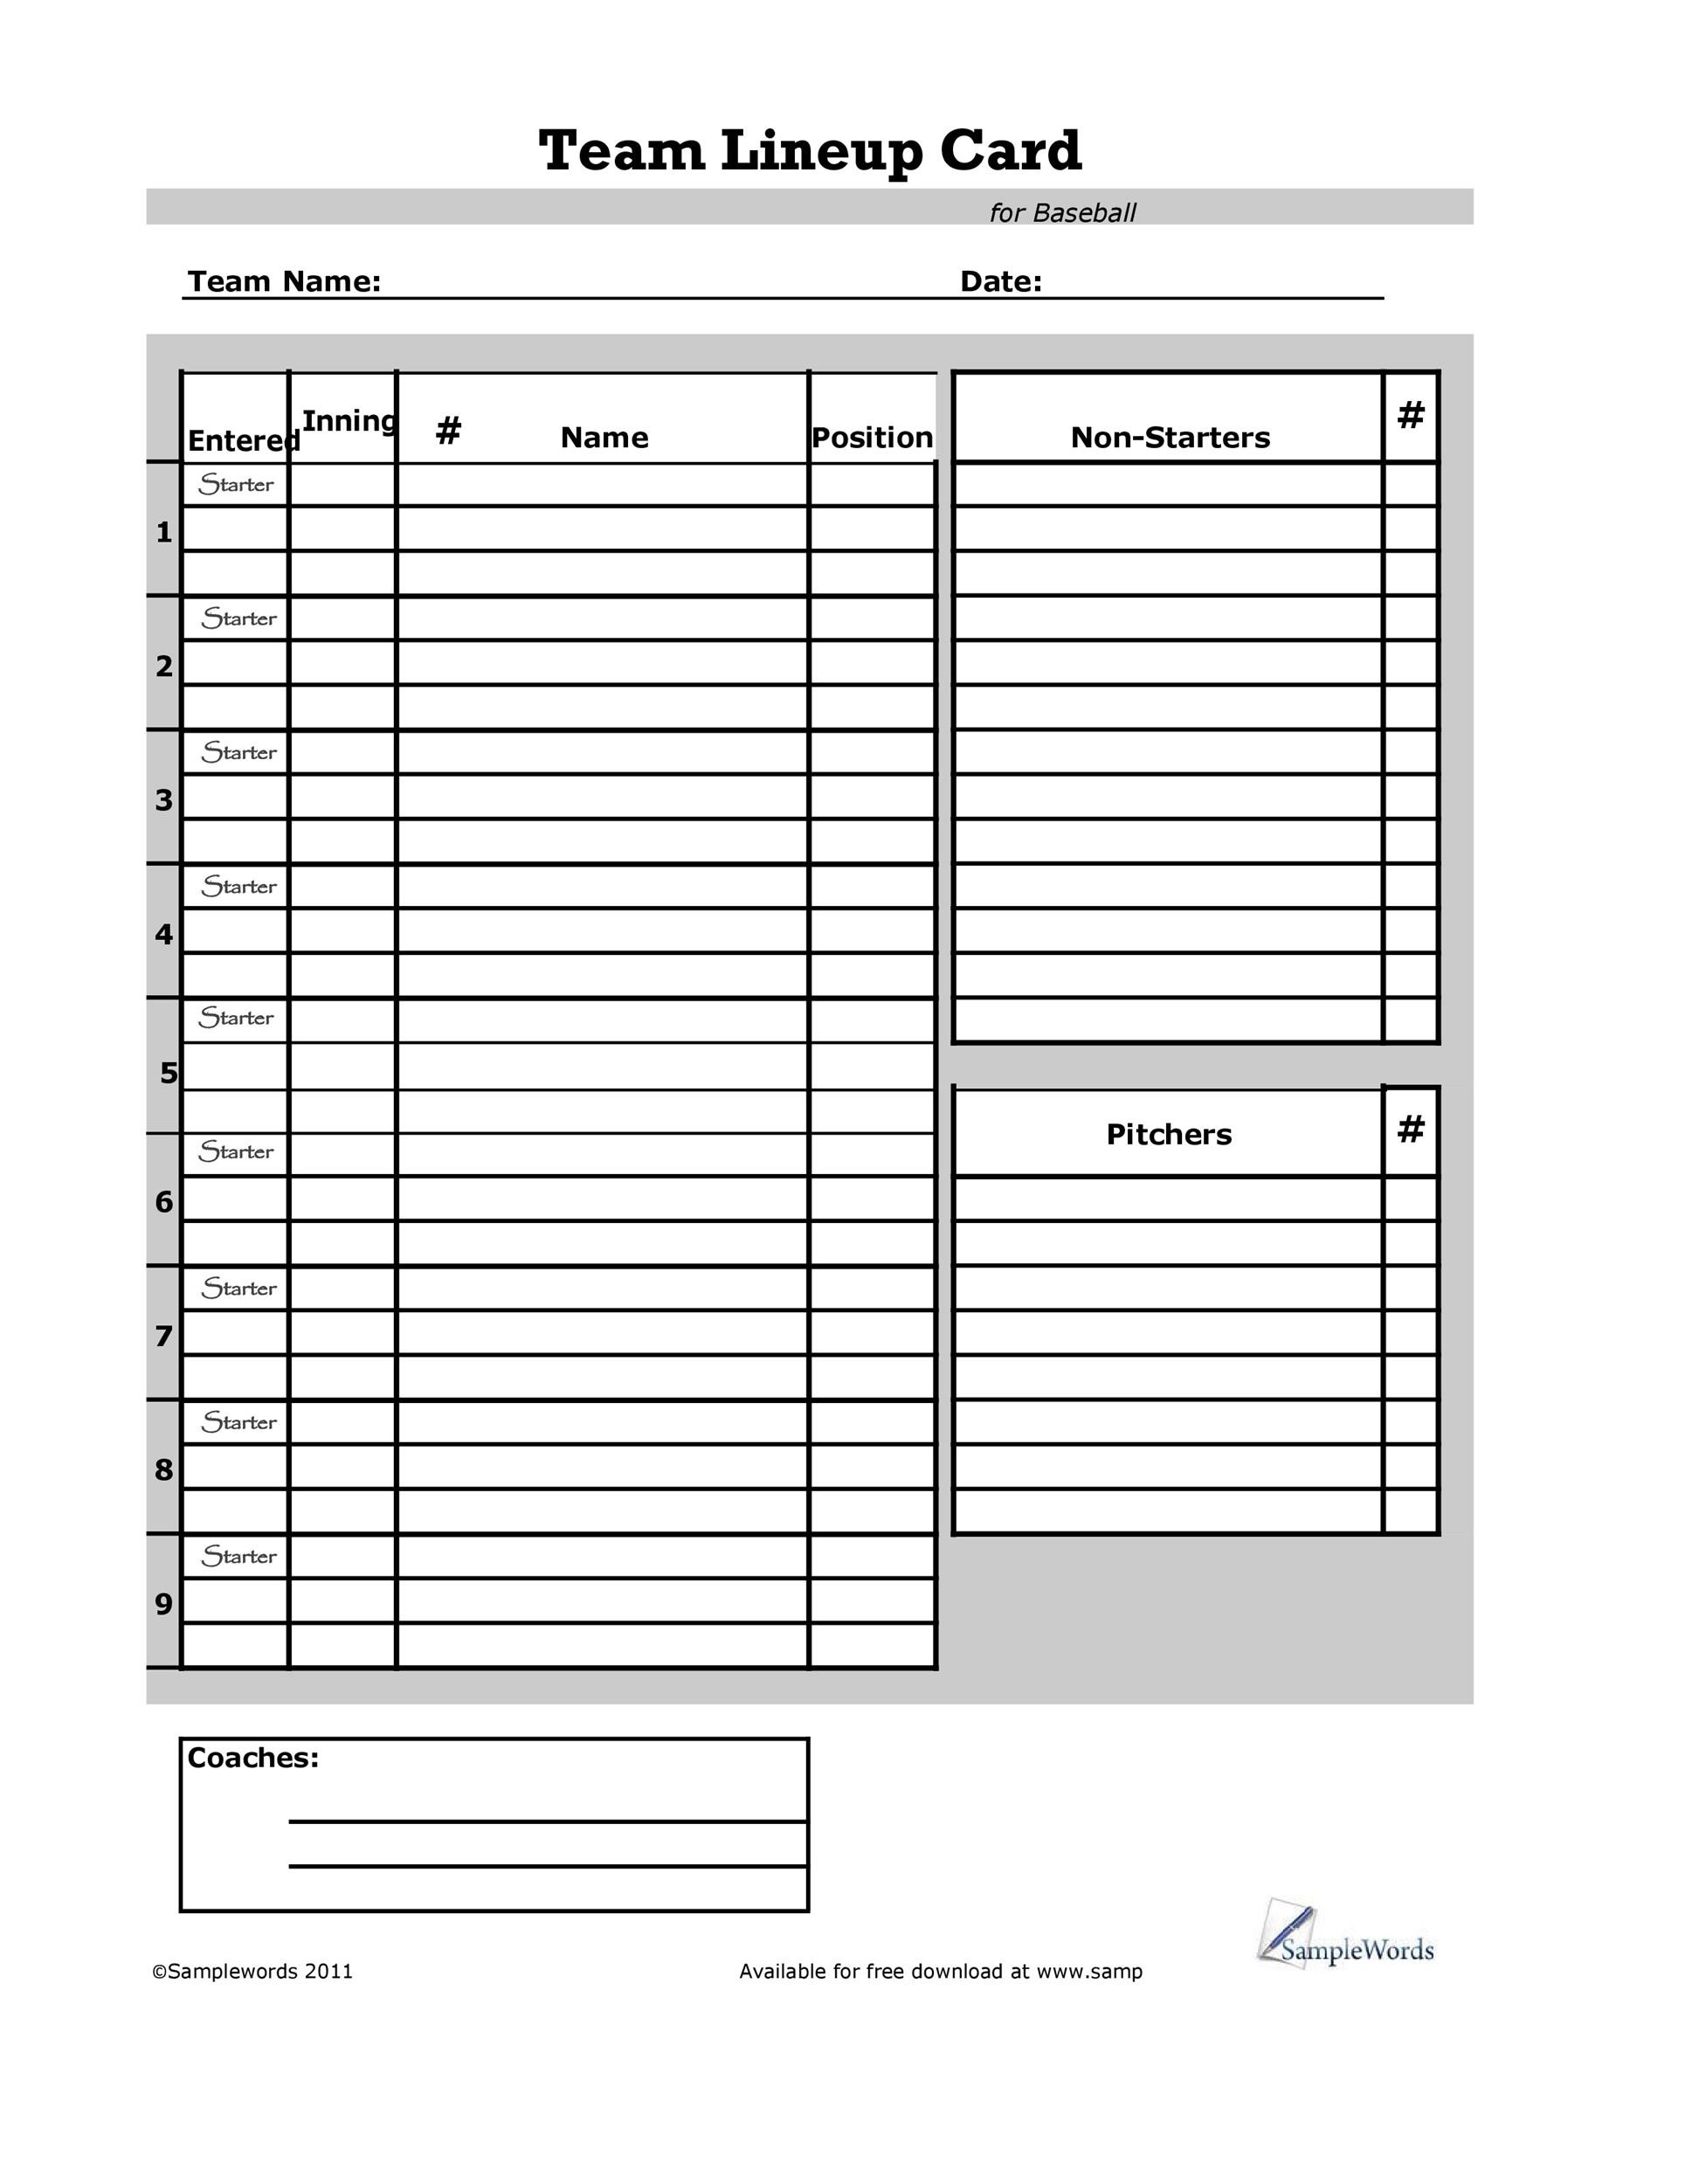 View 22 Inning Baseball Lineup Template Background : Fill, Sign And Inside Baseball Lineup Card Template